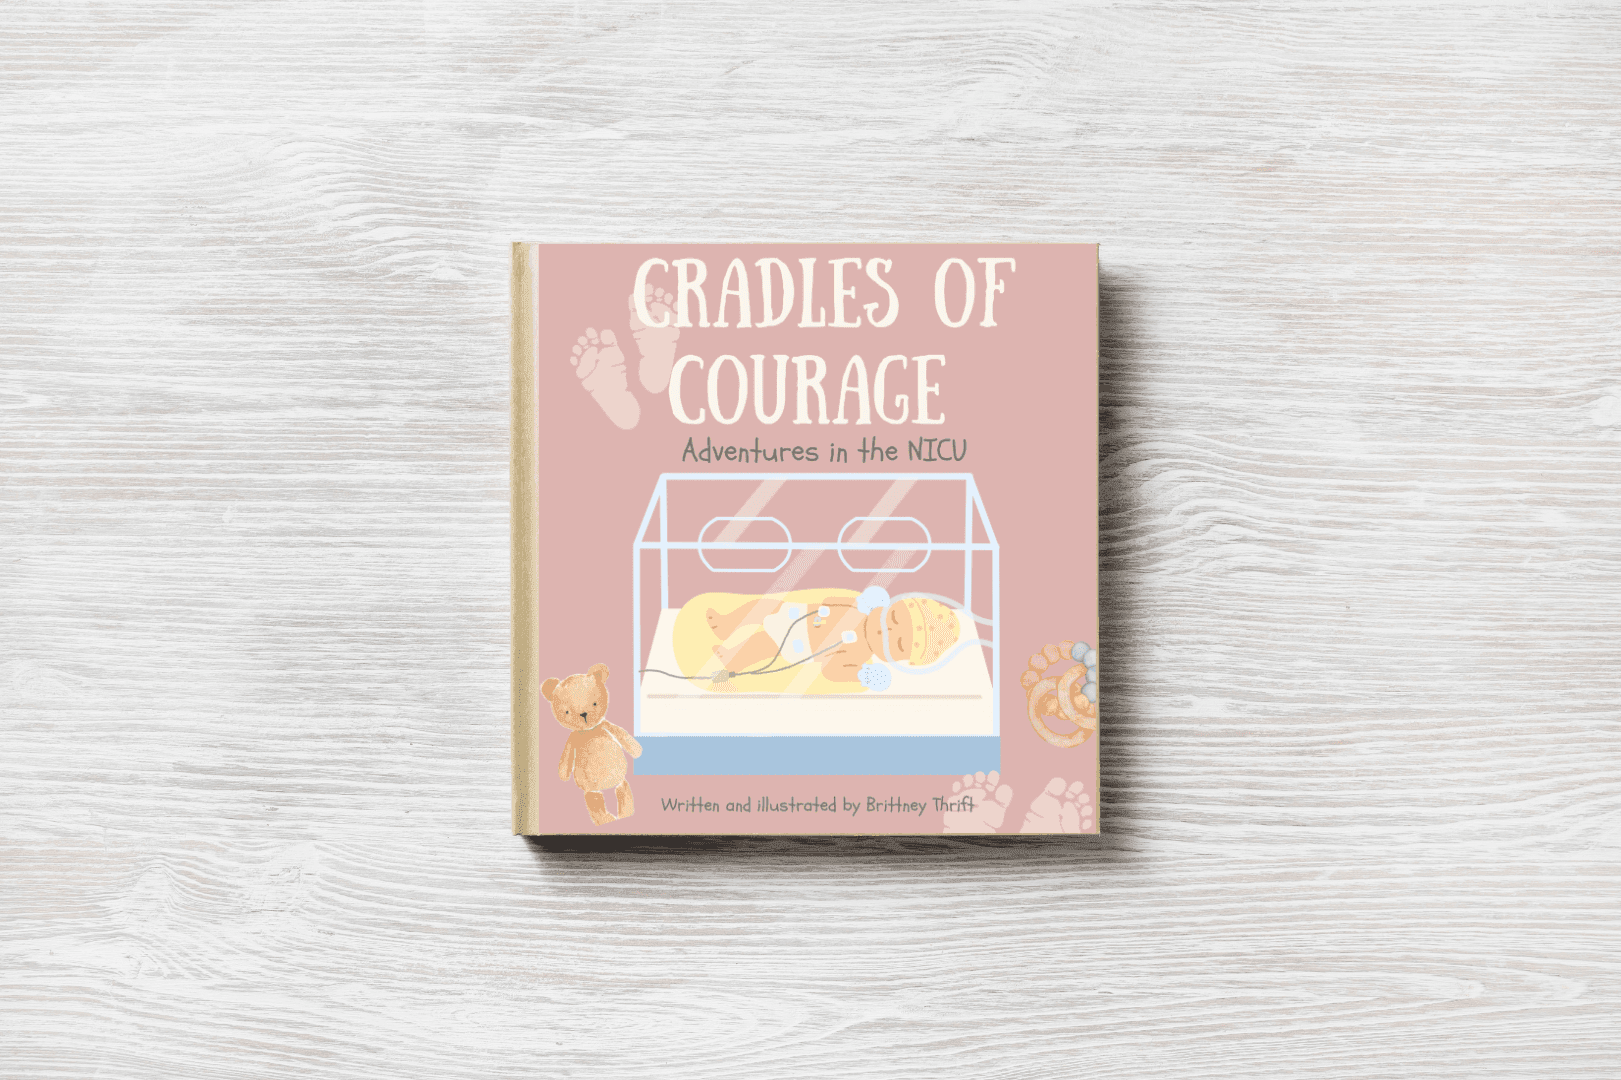 “Cradles of Courage: Adventures in the NICU.” (Pink Edition)